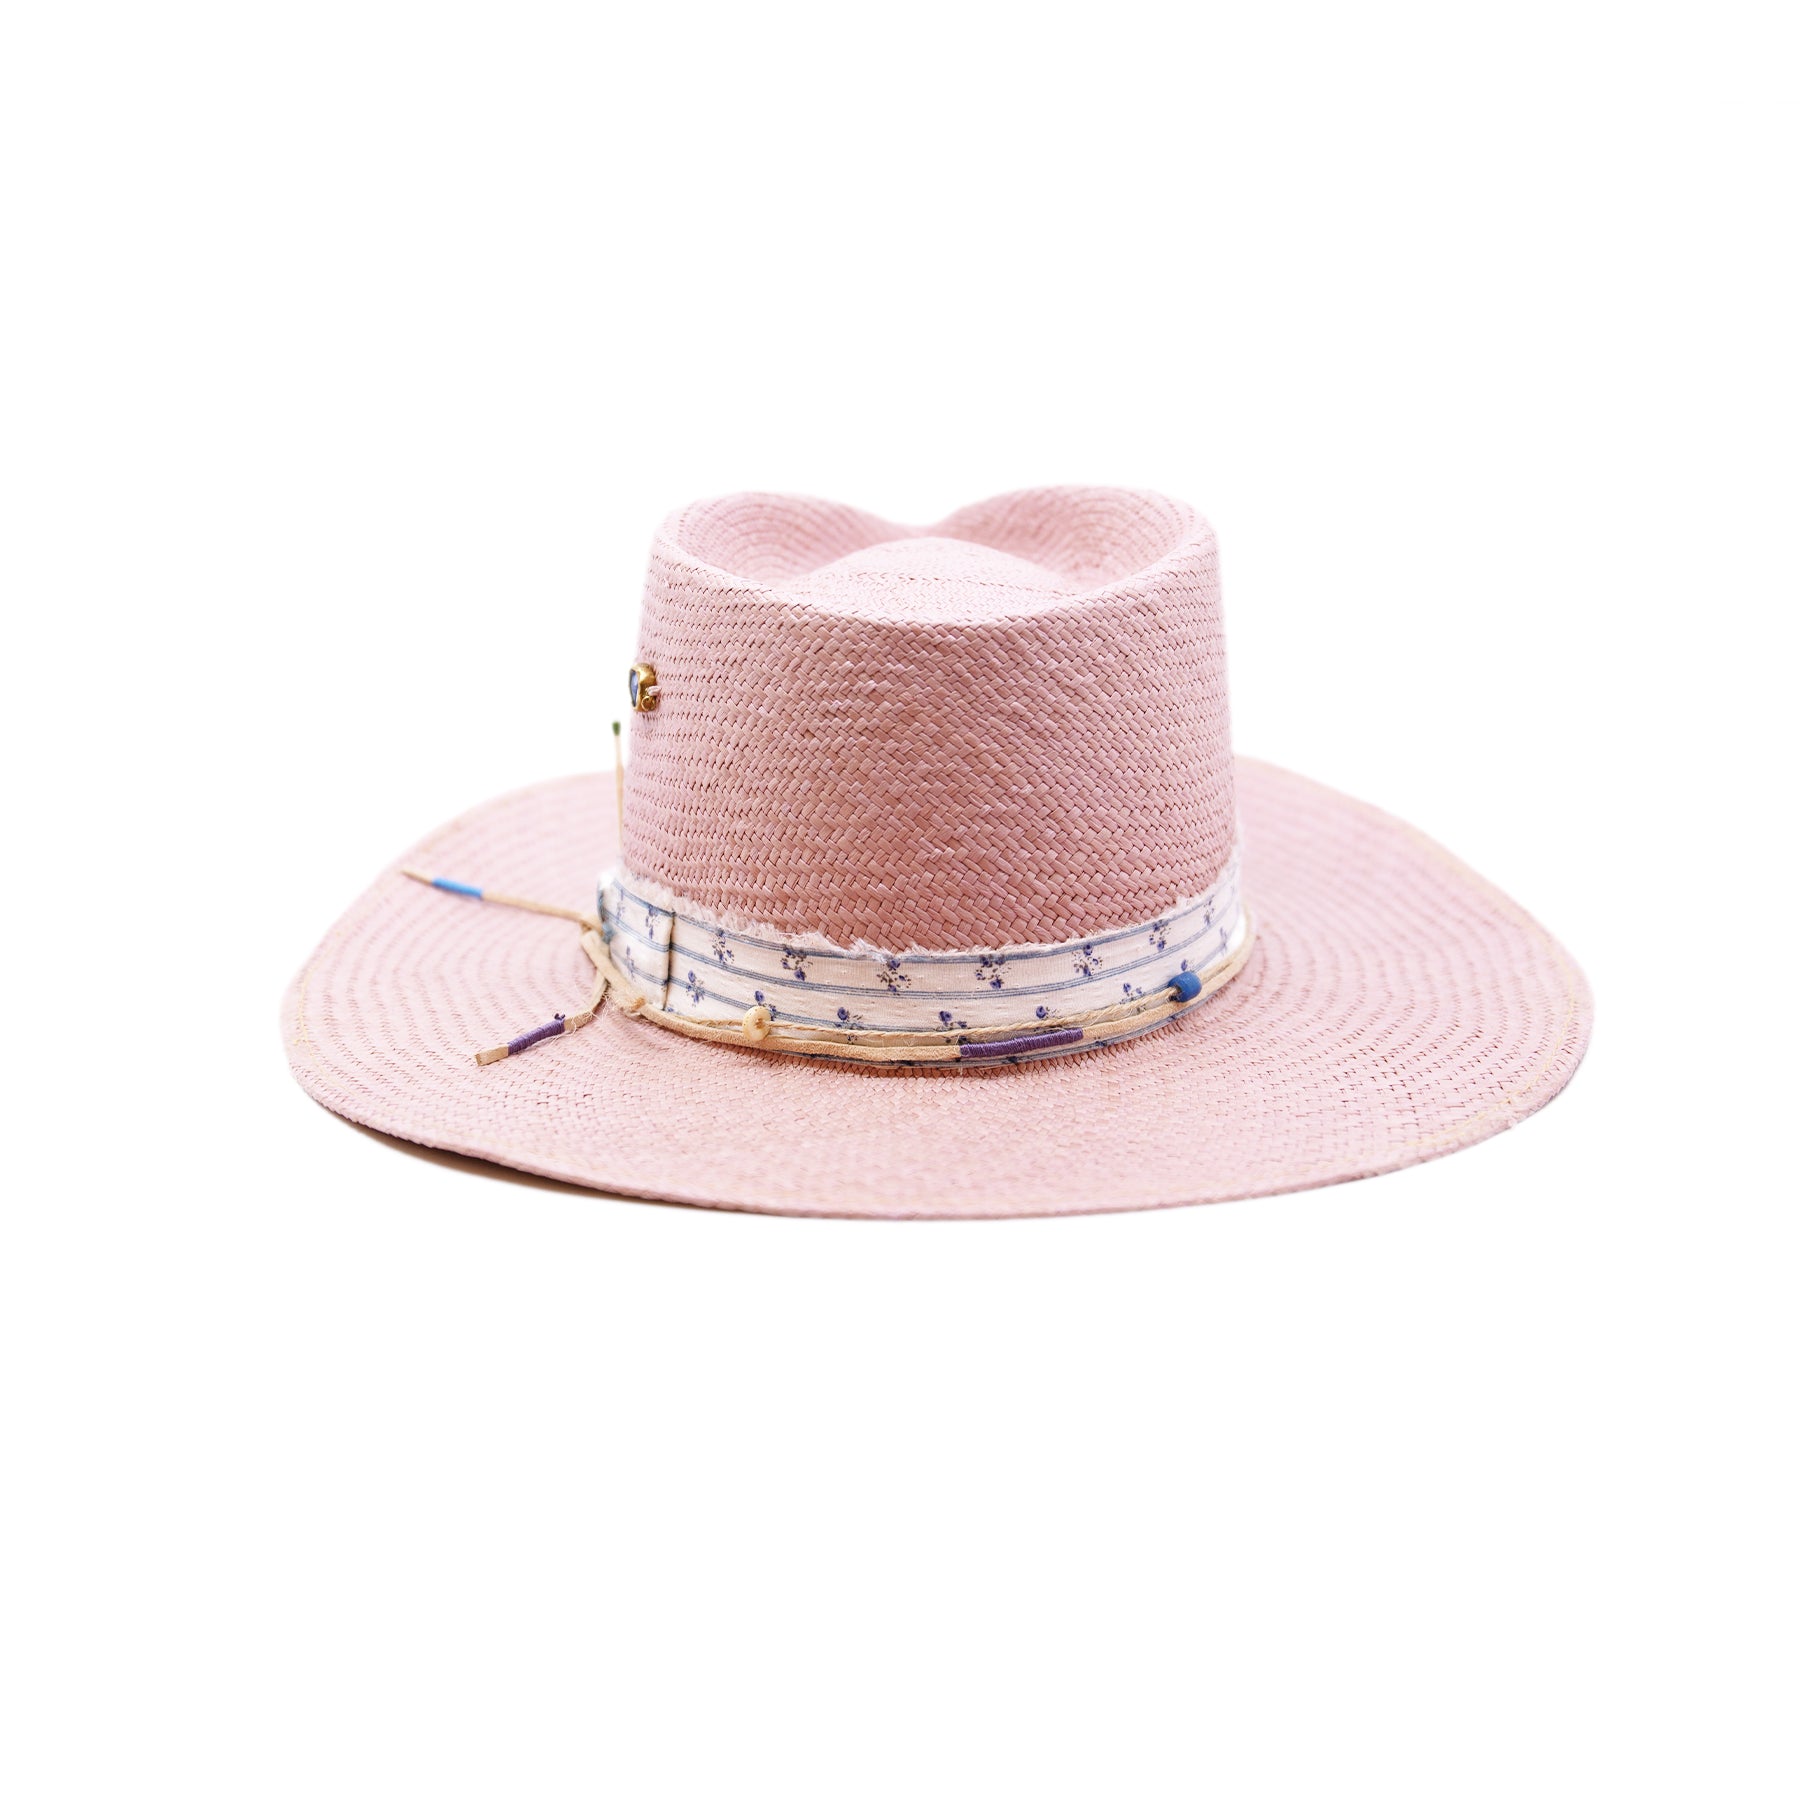 Dandelion Dixie Hwy  100% Ecuadorian straw in Blush  1” deadstock striped fabric band and bow  Nude leather band and twine with accouterments and color accents  Molt-harvested parrot feather  Custom NF jewelry piece on crown  Woven in Ecuador  Subtle western flanged brim  Made in USA